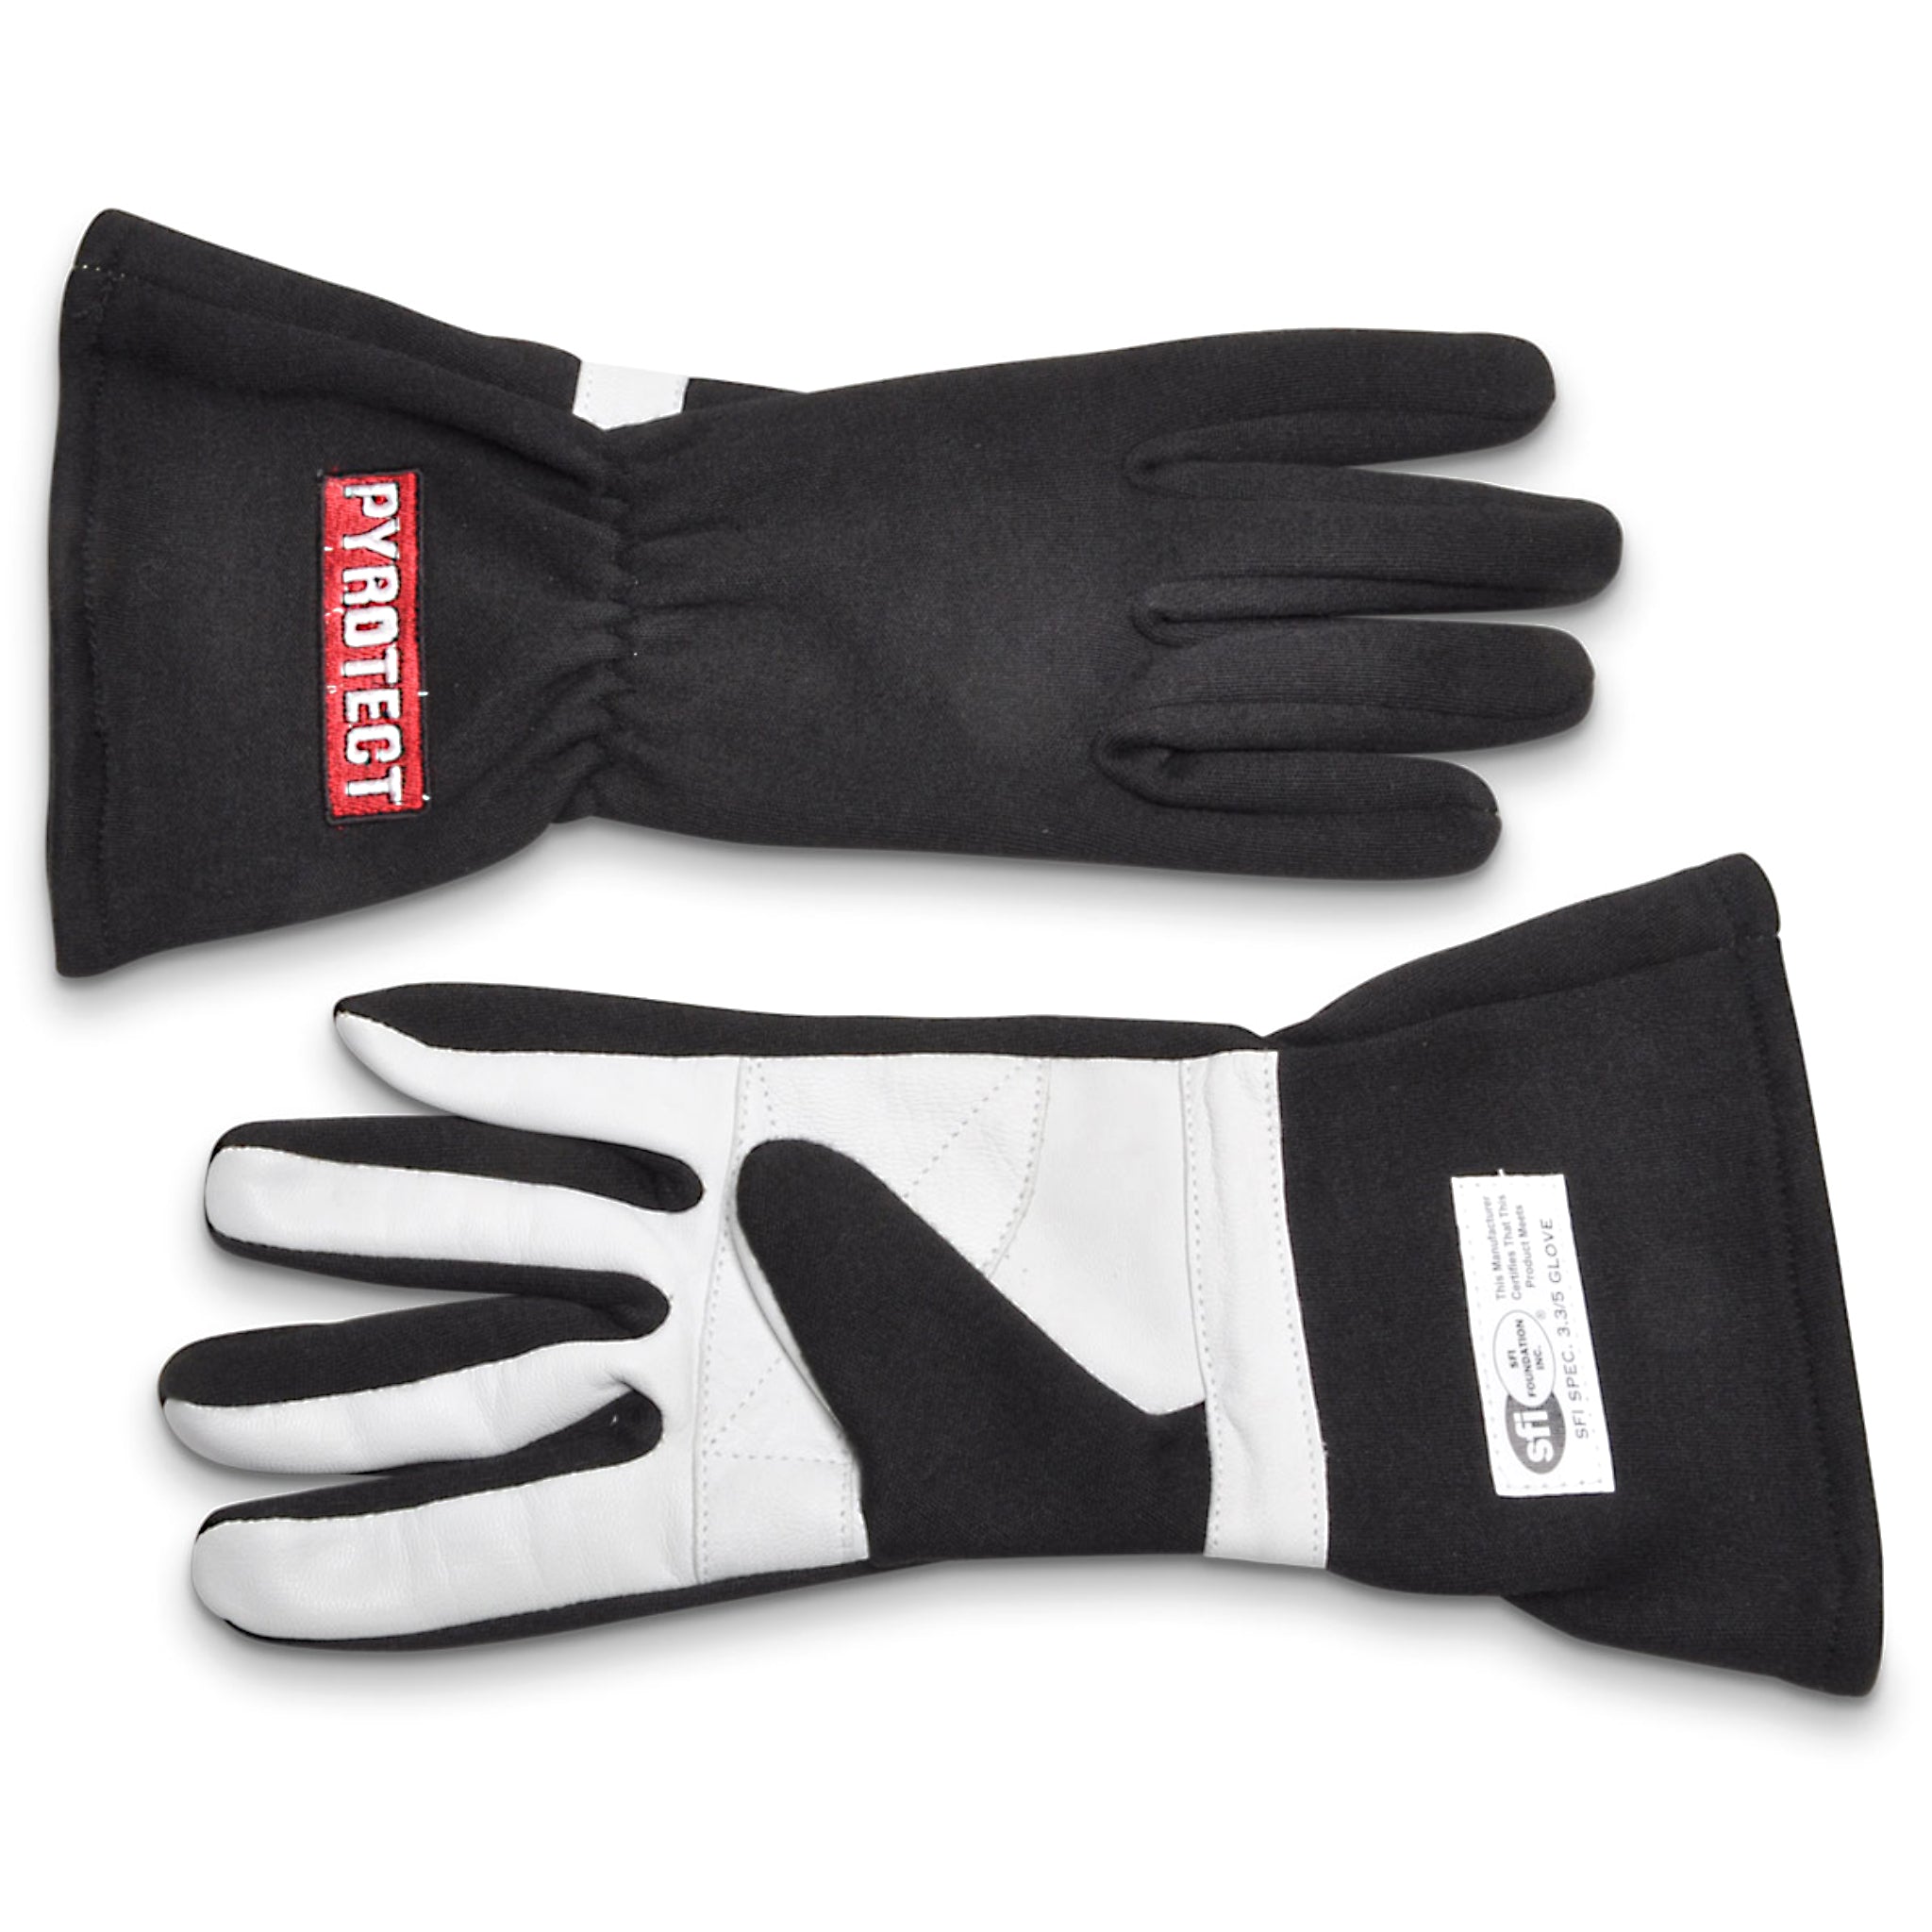 Pyrotect Glove Sport 2 Layer Blk Medium SFI-5 Safety Clothing Driving Gloves main image